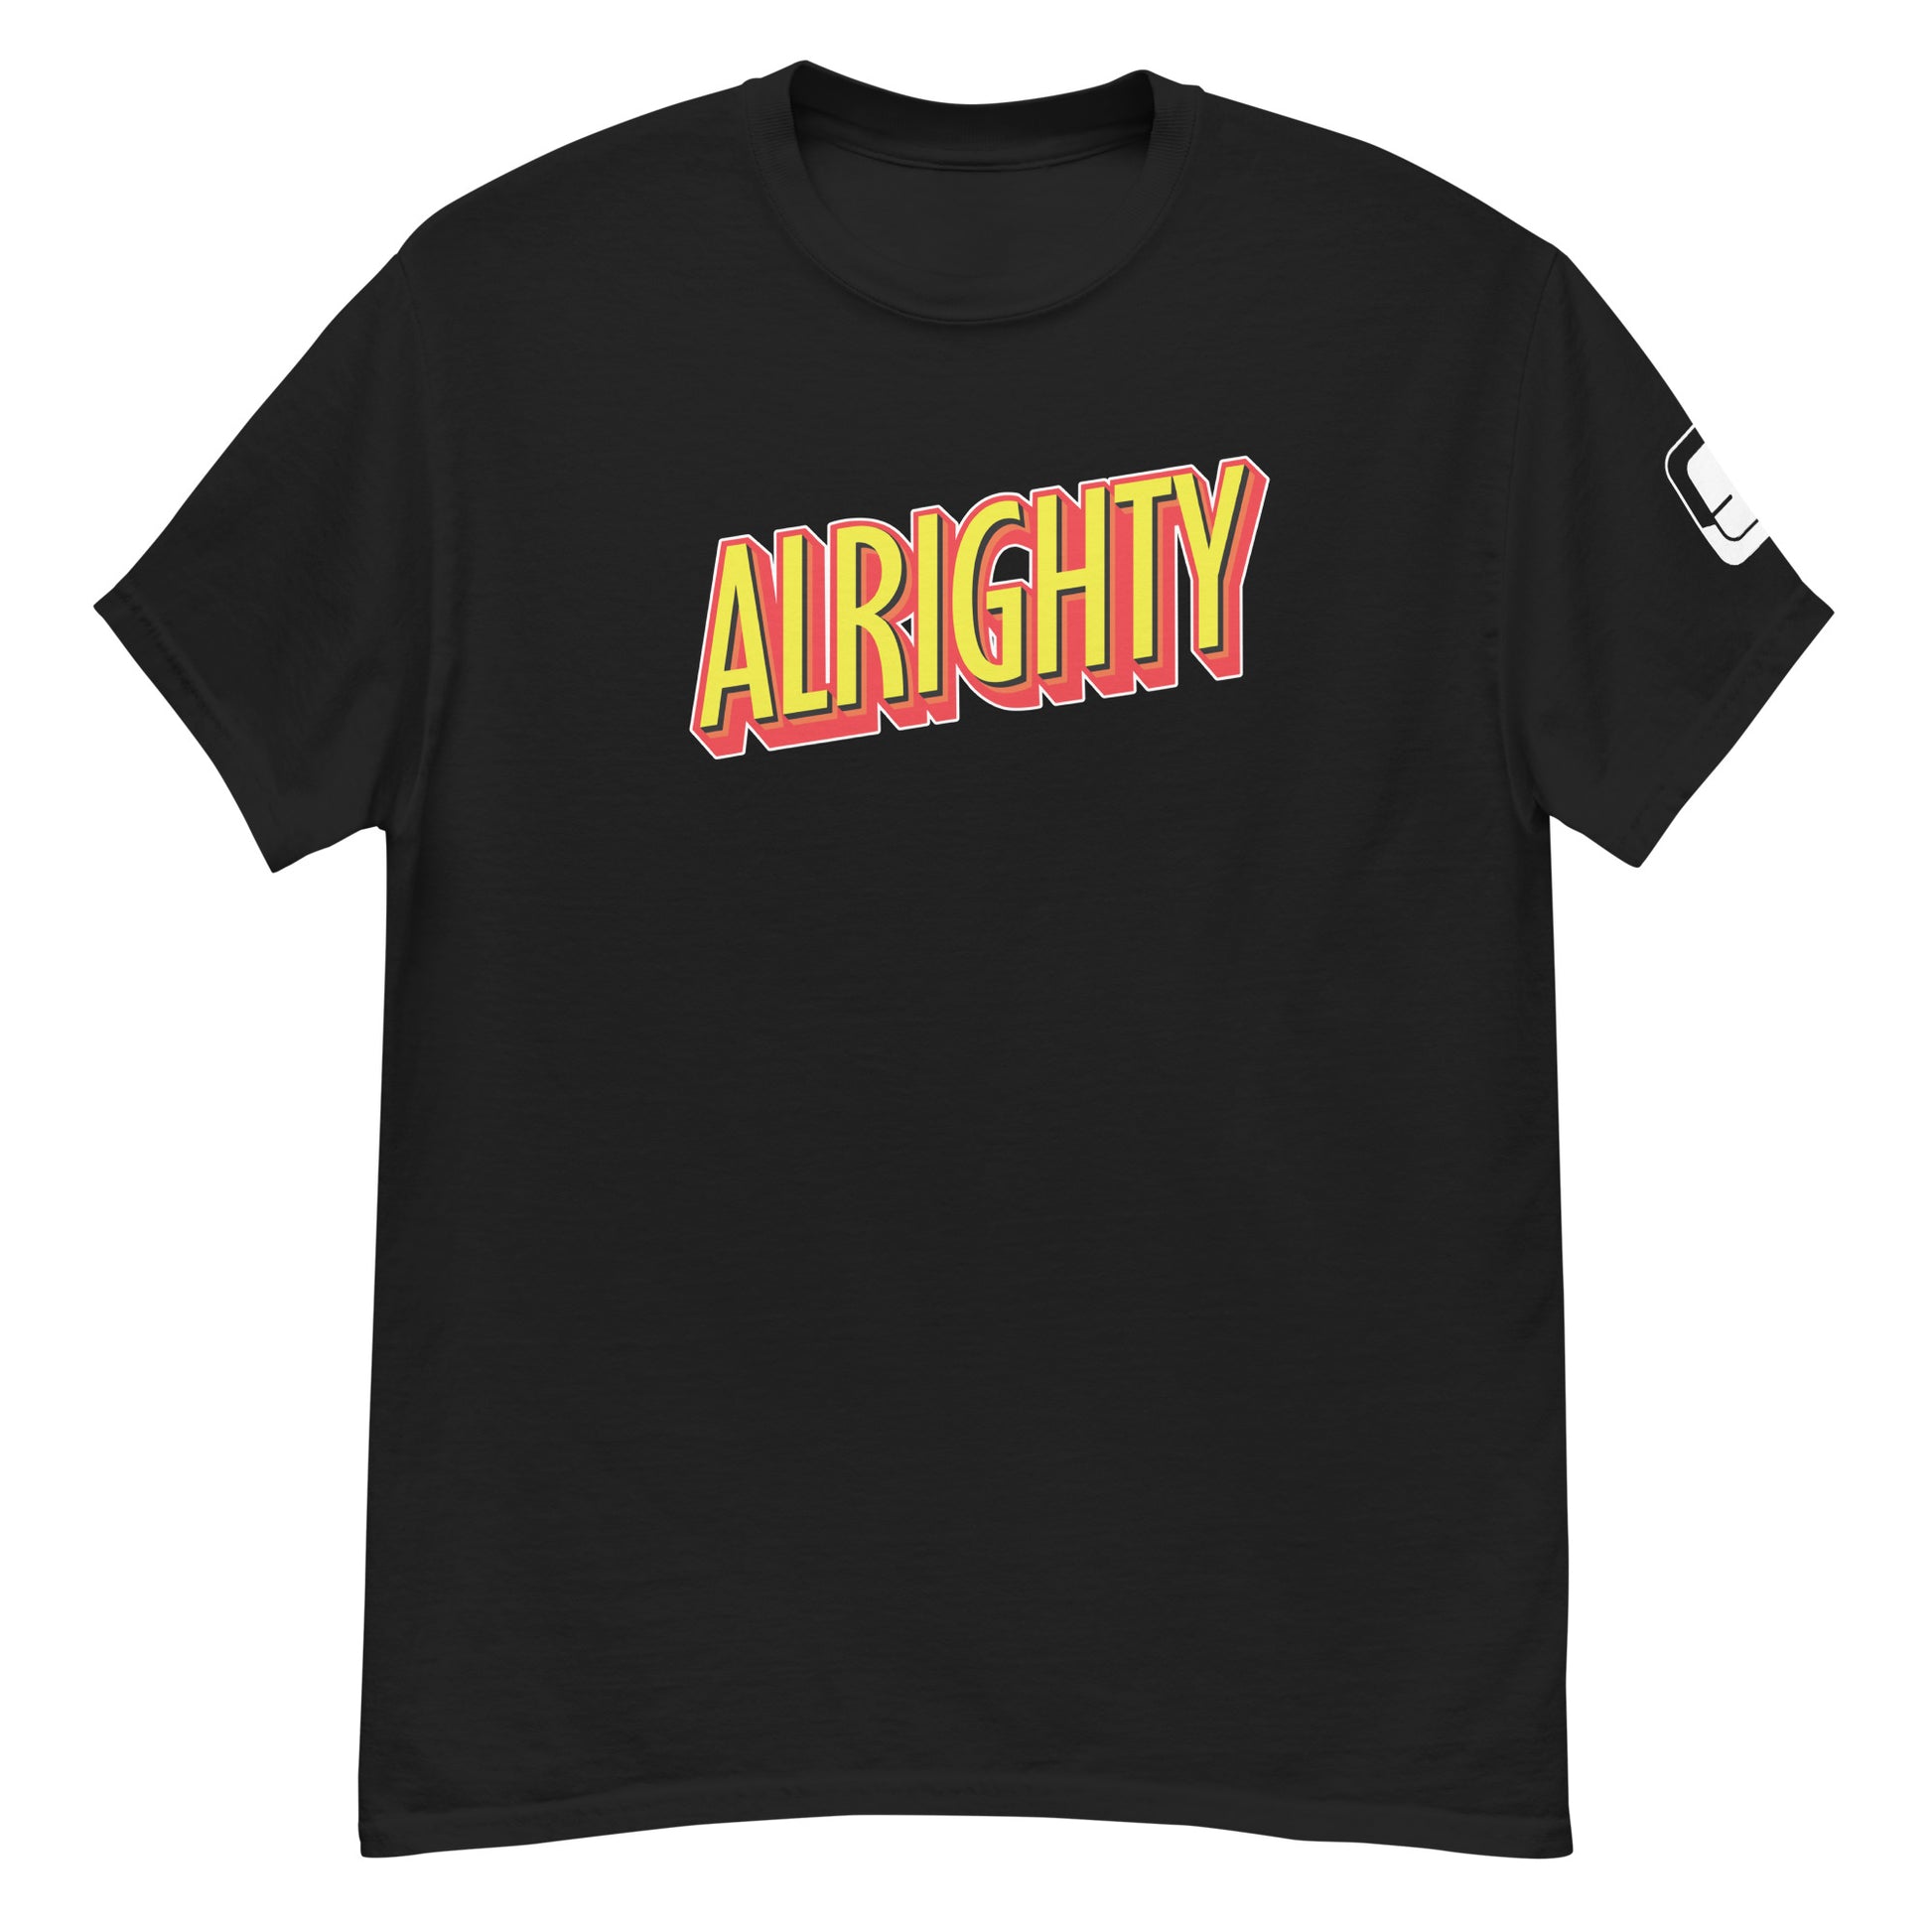 Black t-shirt with the word 'ALRIGHTY' printed in a bold, red and yellow sans-serif font, featuring a small logo patch on the sleeve, laid flat against a white background.